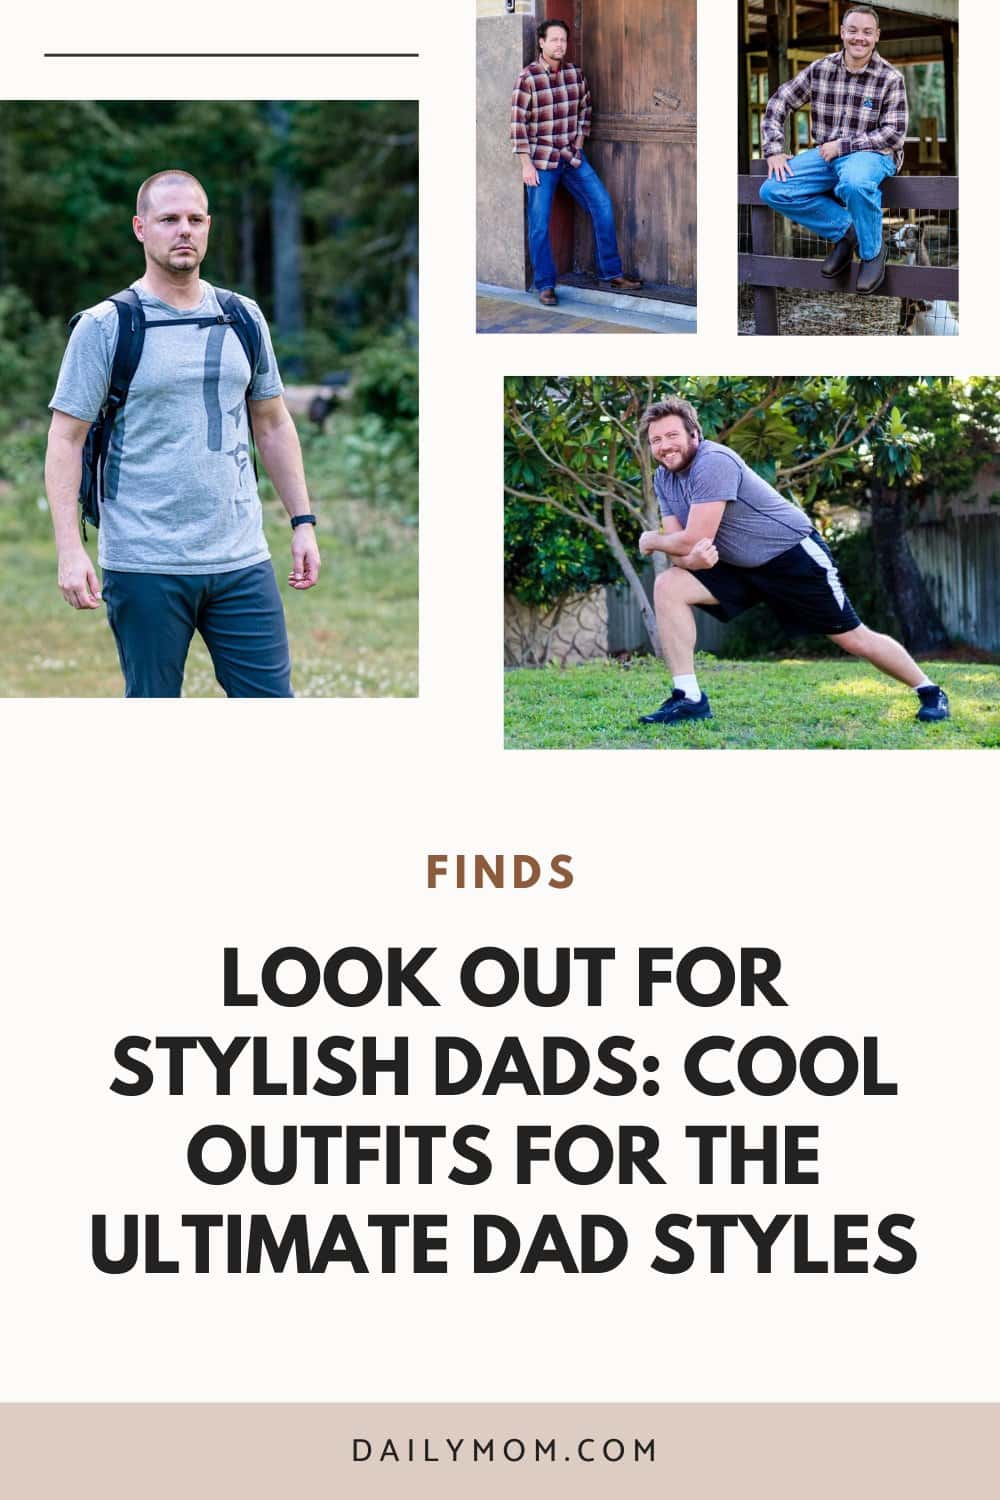 Look Out For Stylish Dads: Cool Outfits For The Ultimate Dad Styles 37 Daily Mom, Magazine For Families